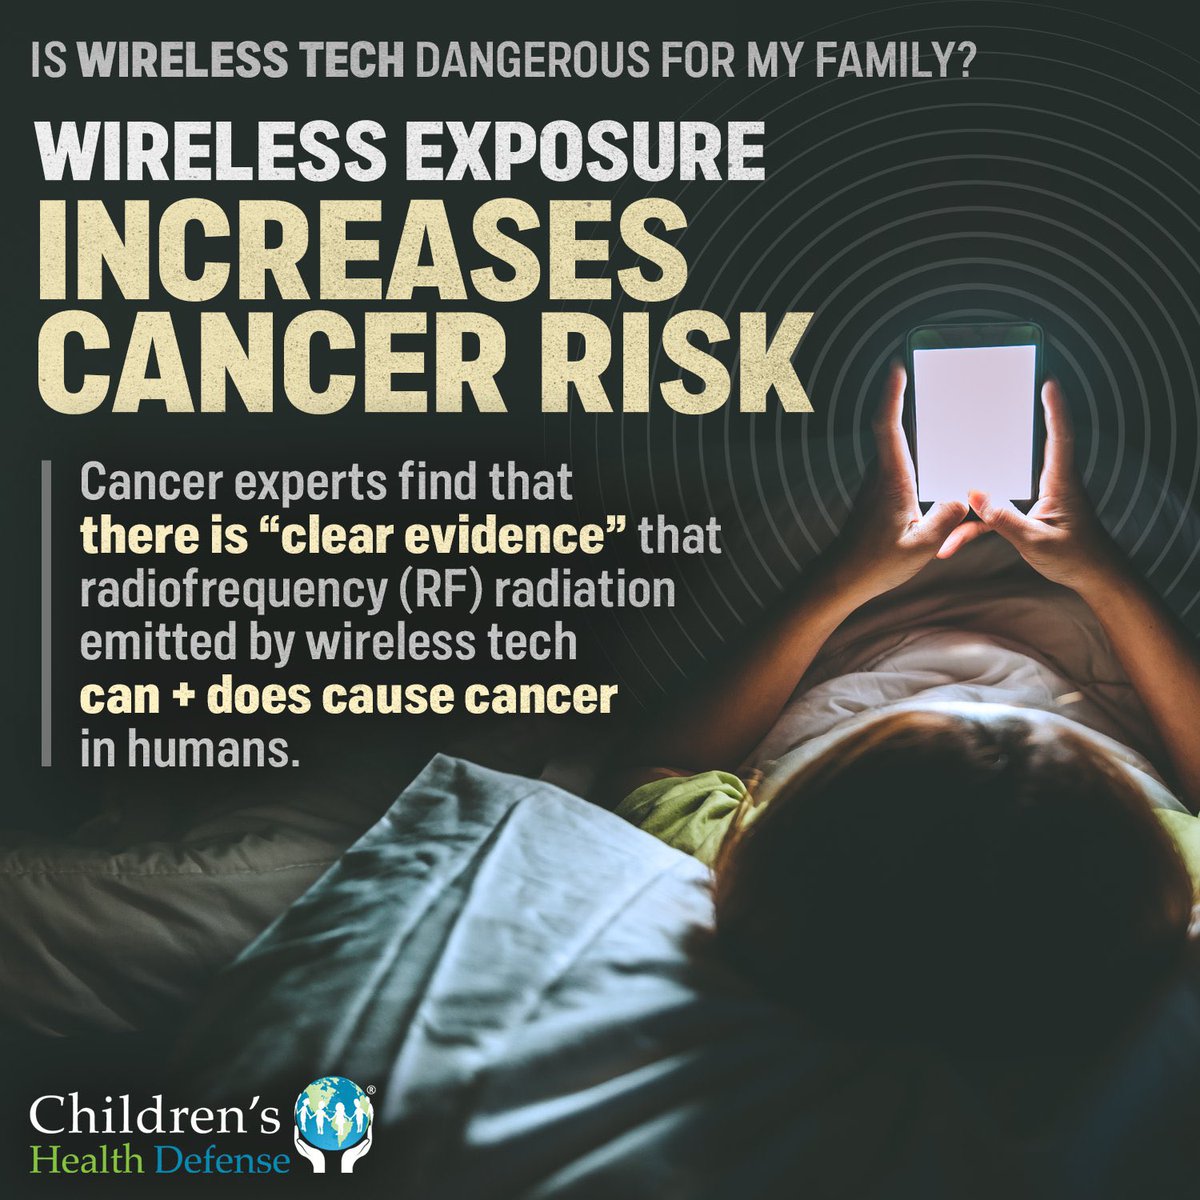 Wireless regulations are designed for approving wireless products rather than protecting users.

They are based on a thermal test only, but radiation damages your cells in many other ways besides heating them.

You can develop brain tumors without your head ever feeling hot. #5G